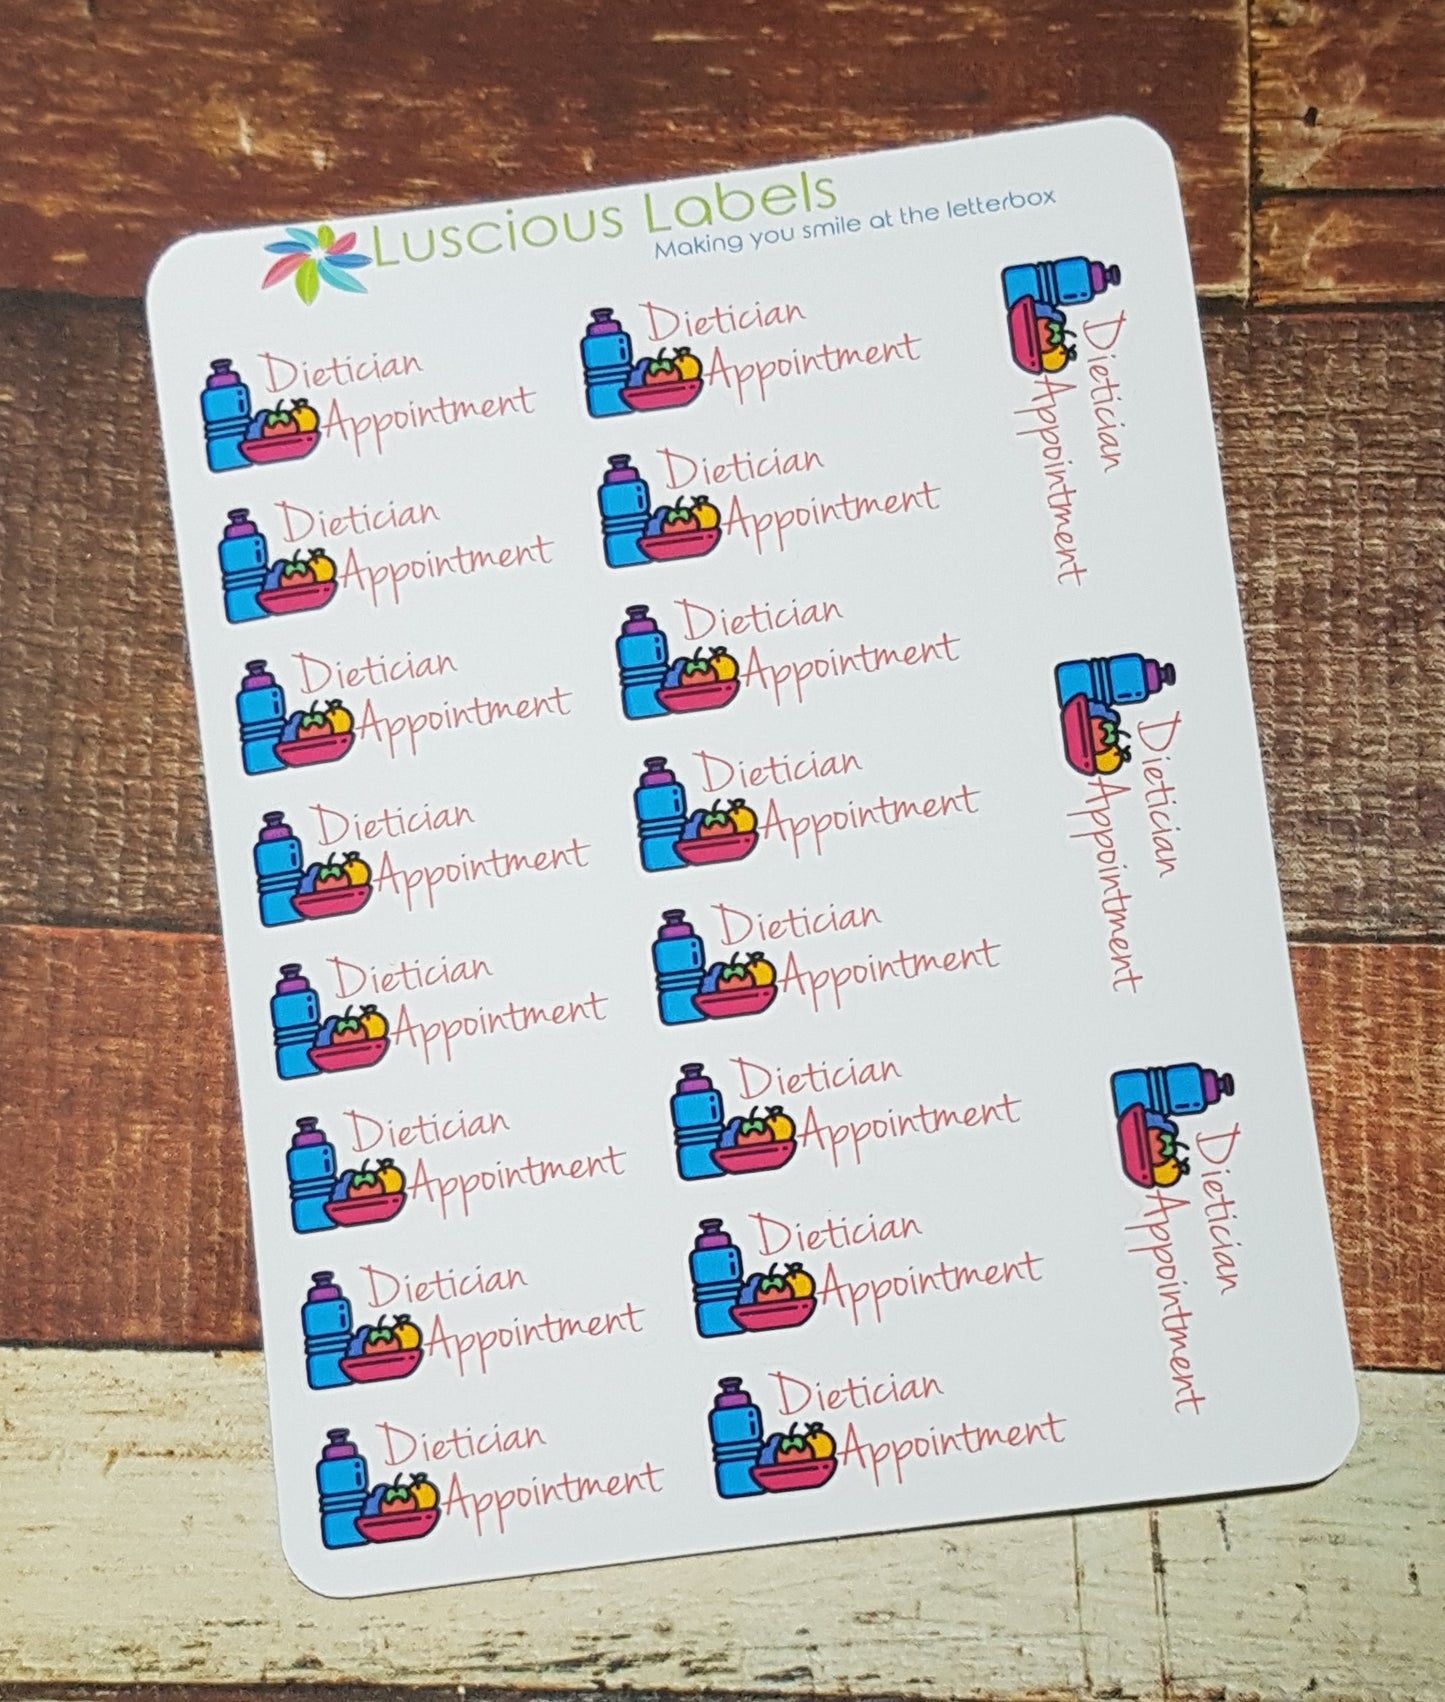 Allied Health, Specialist Appointment Stickers